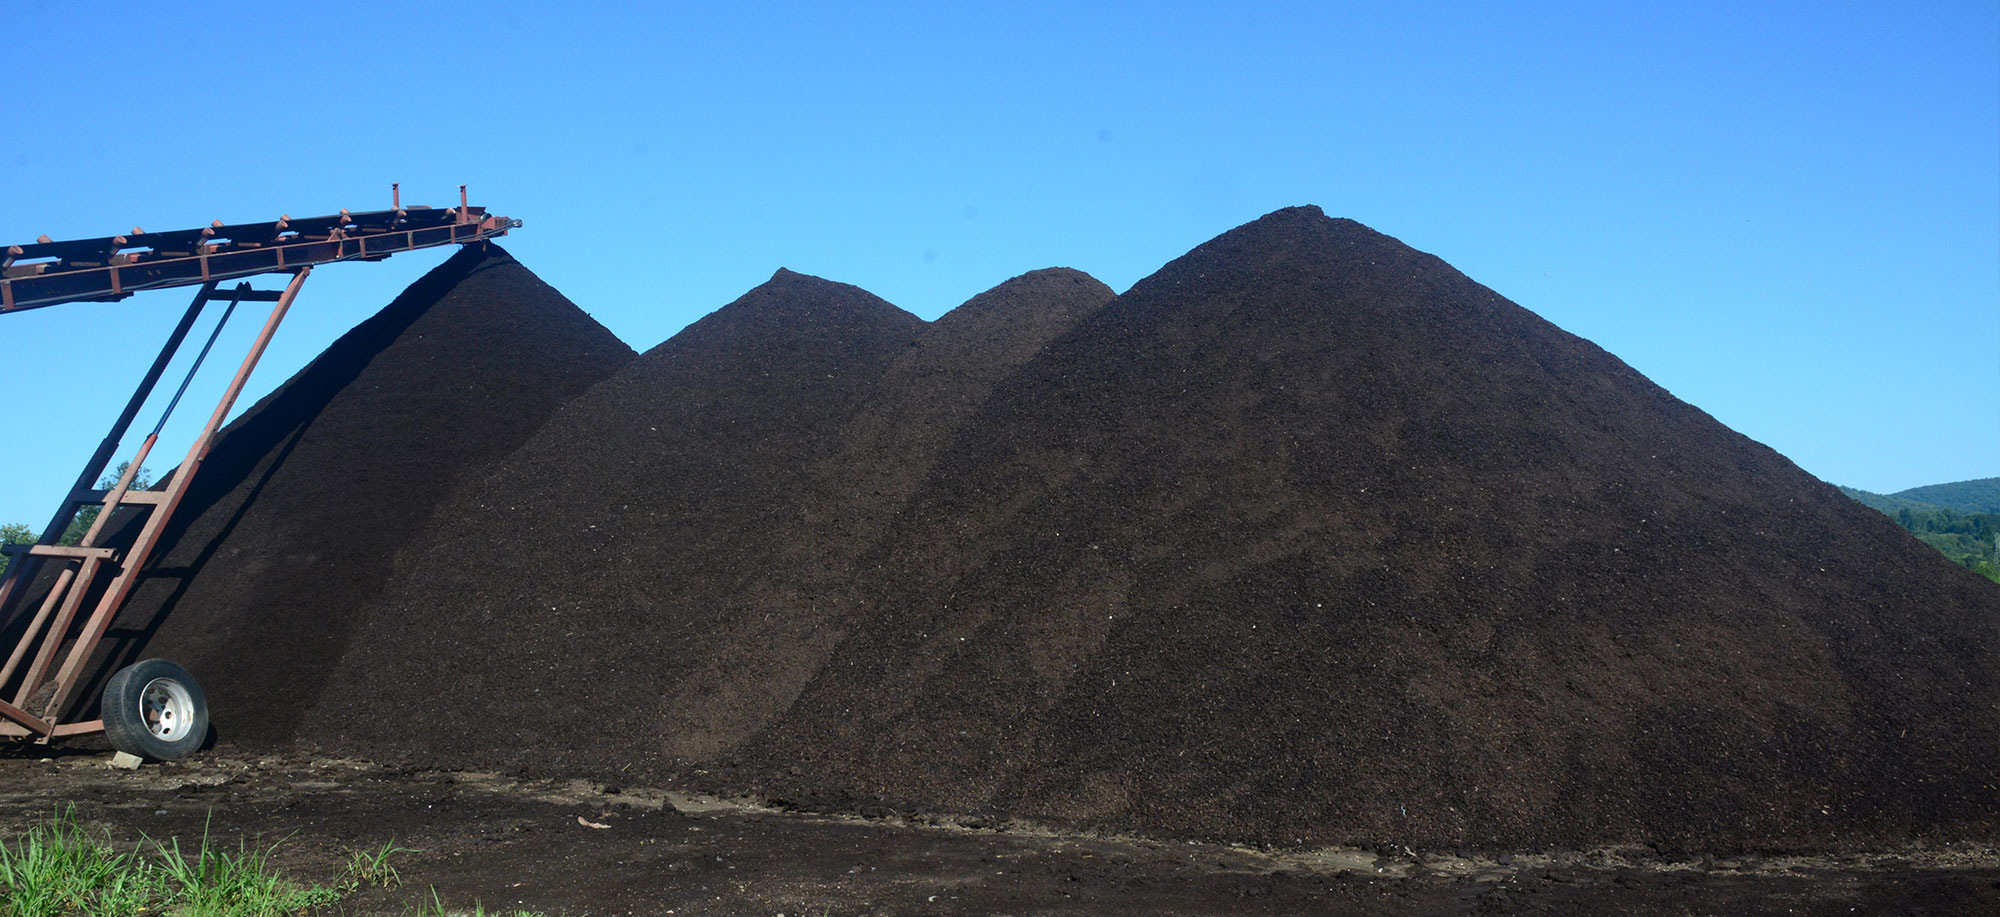 The Majority of our Compost is Used on the Farm